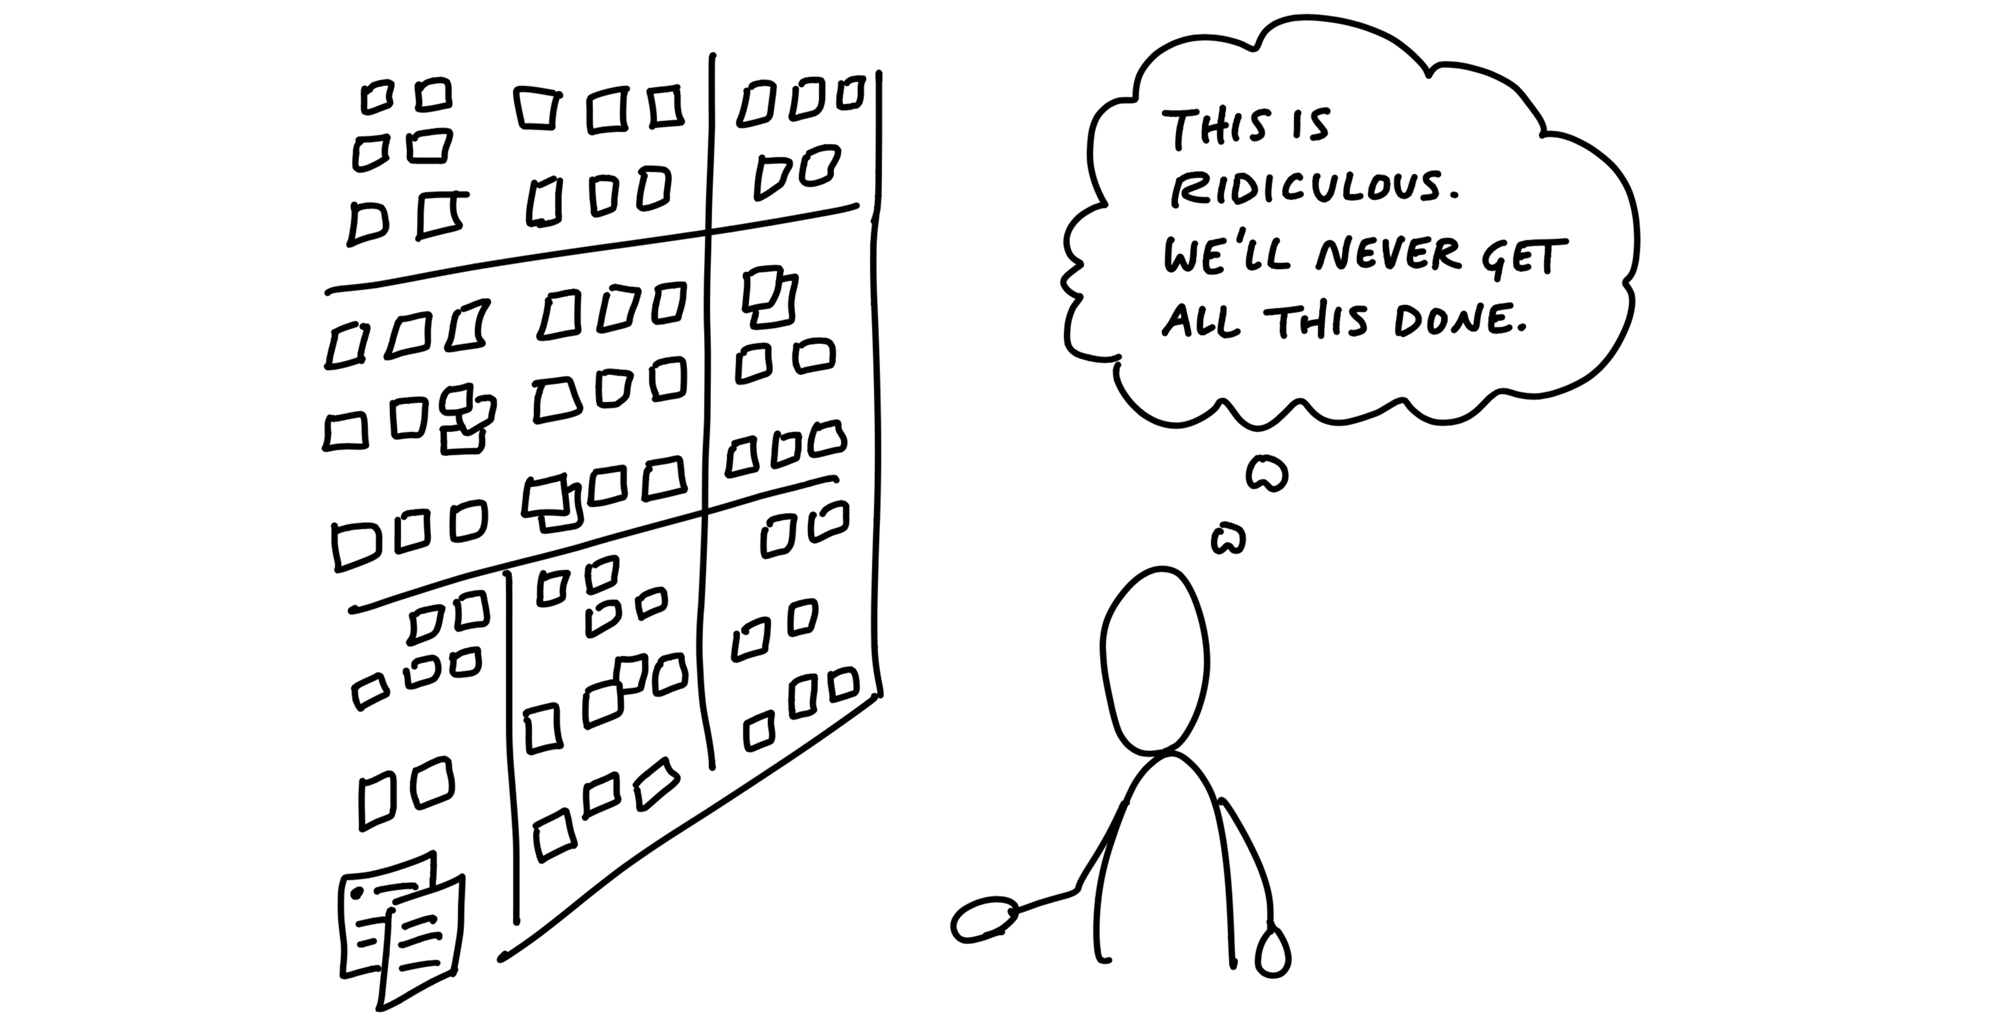 Cartoon. A person stands in front of a wall covered in countless sticky notes. A thought bubble above the person says: This is ridiculous. We'll never get all this done.